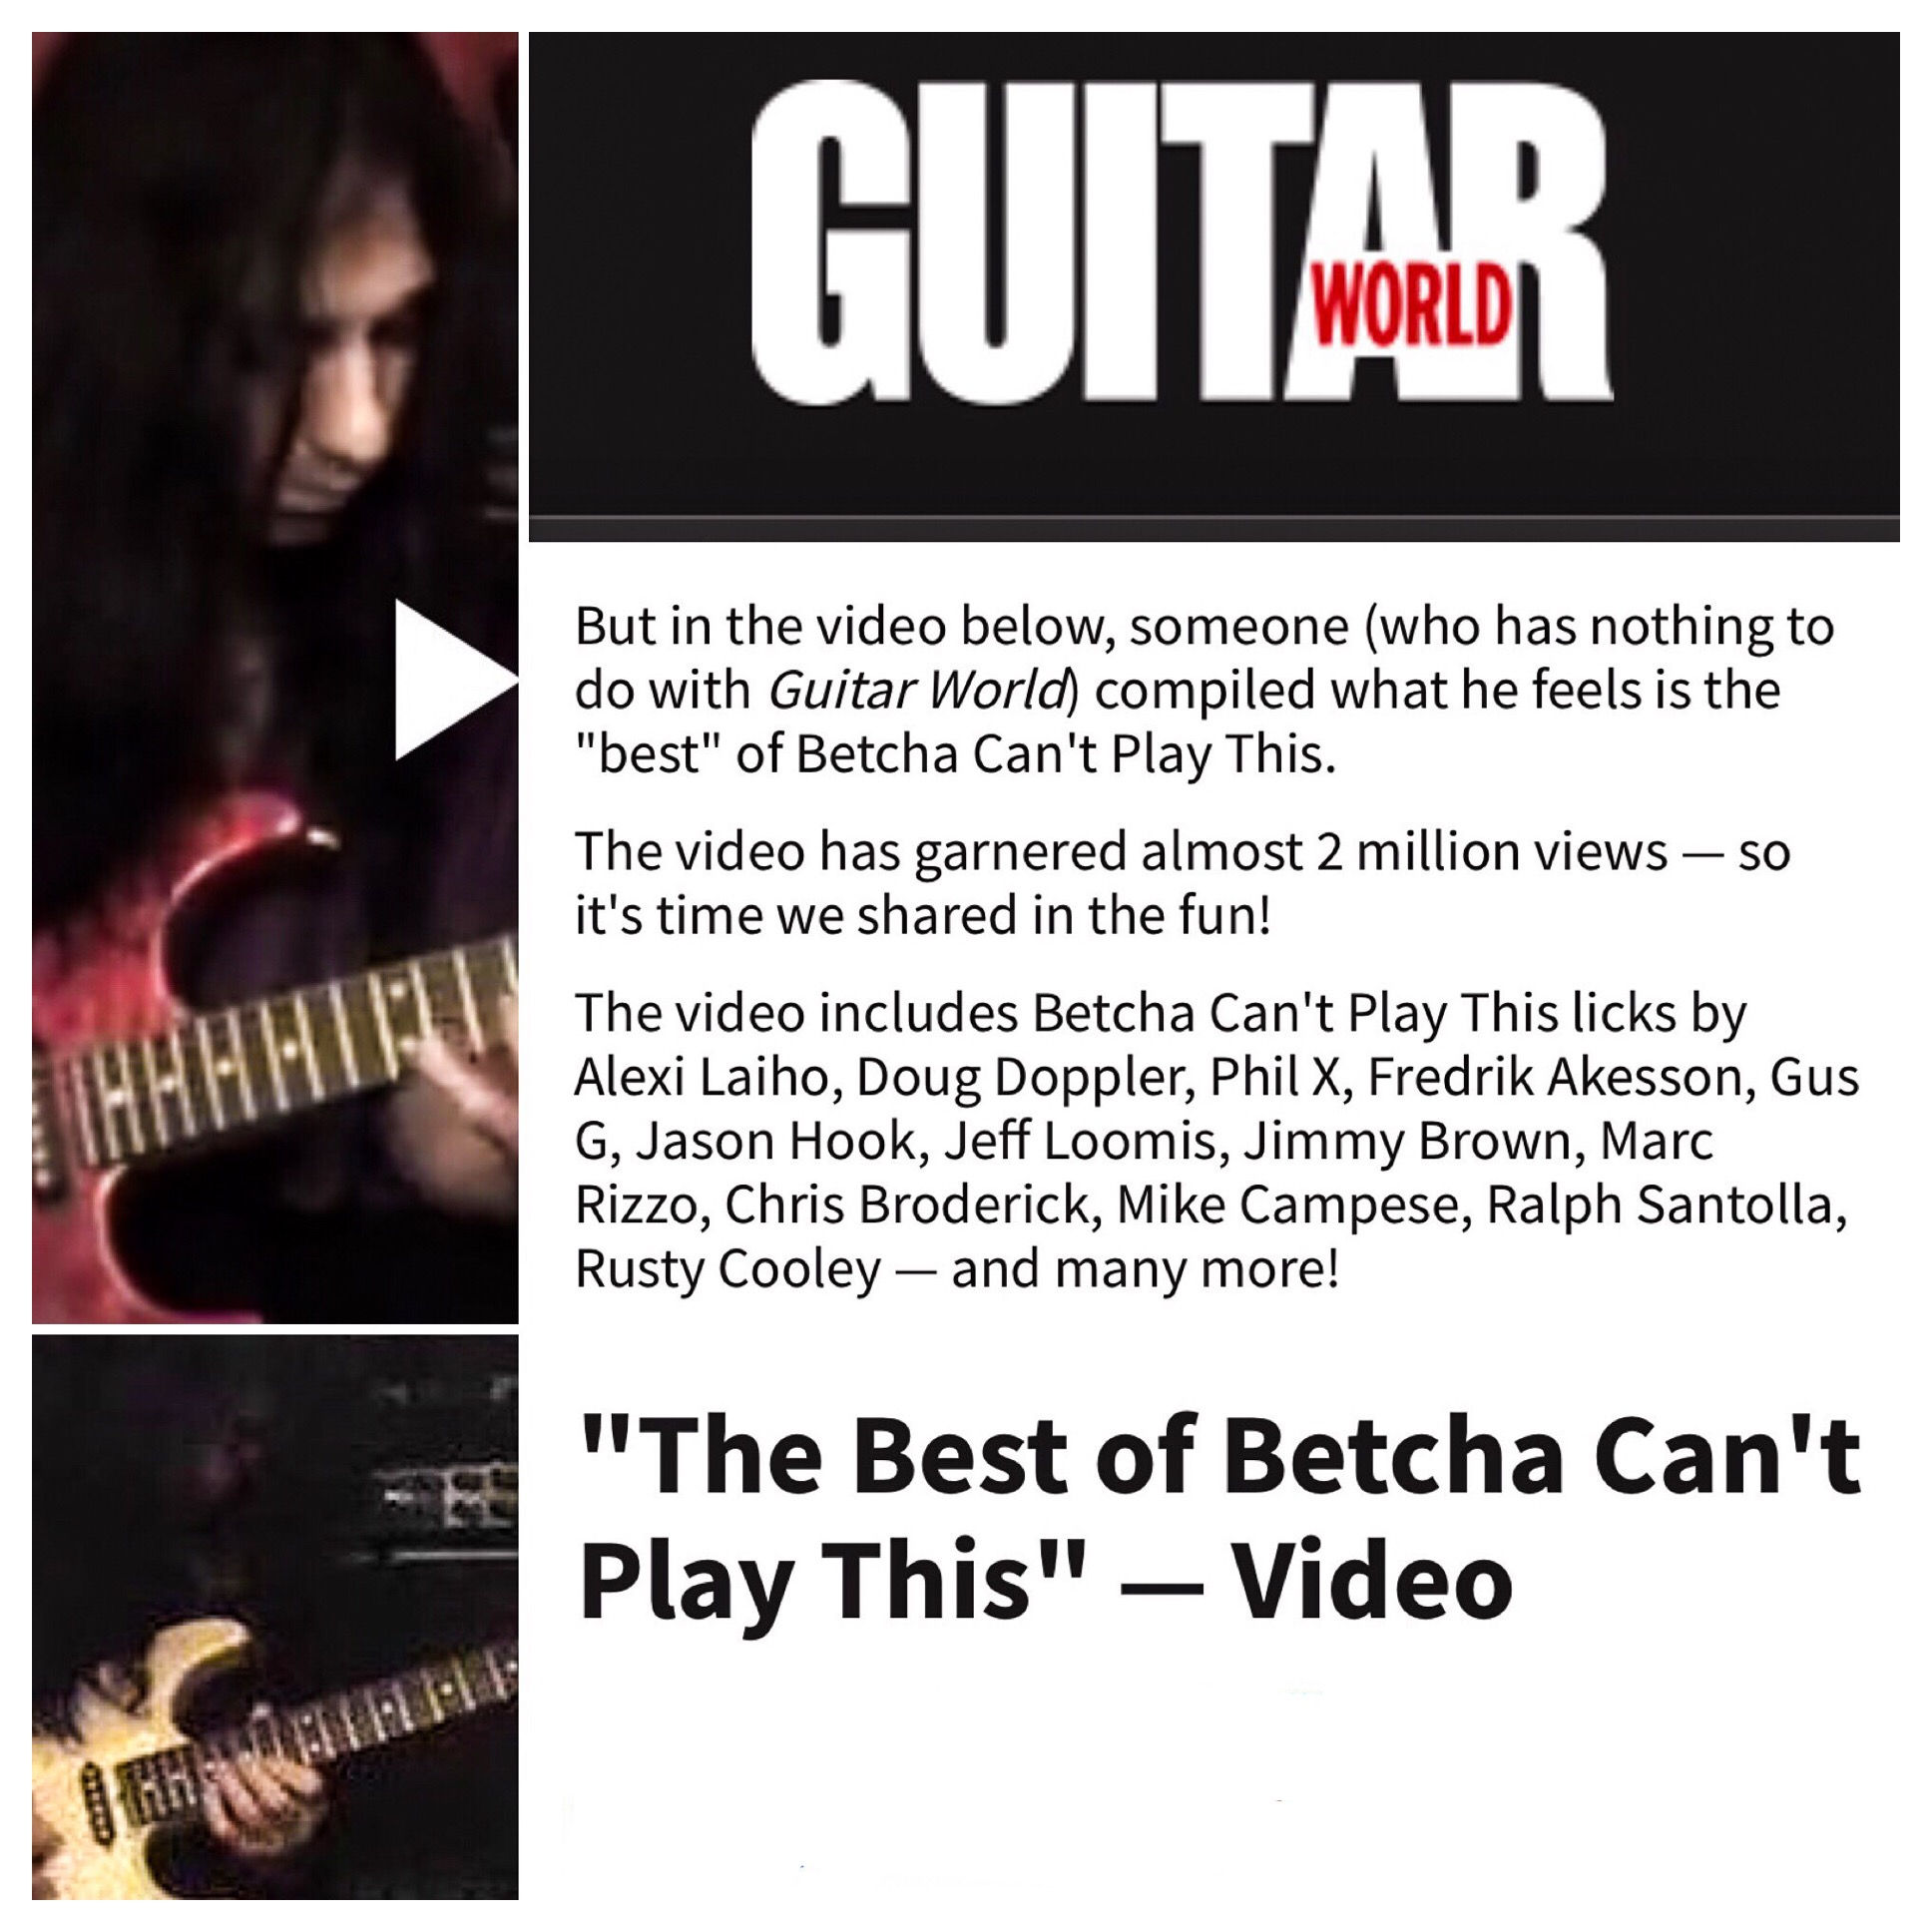 Mike Campese, Guitar World Magazine, Best of "Betcha Can't Play This".